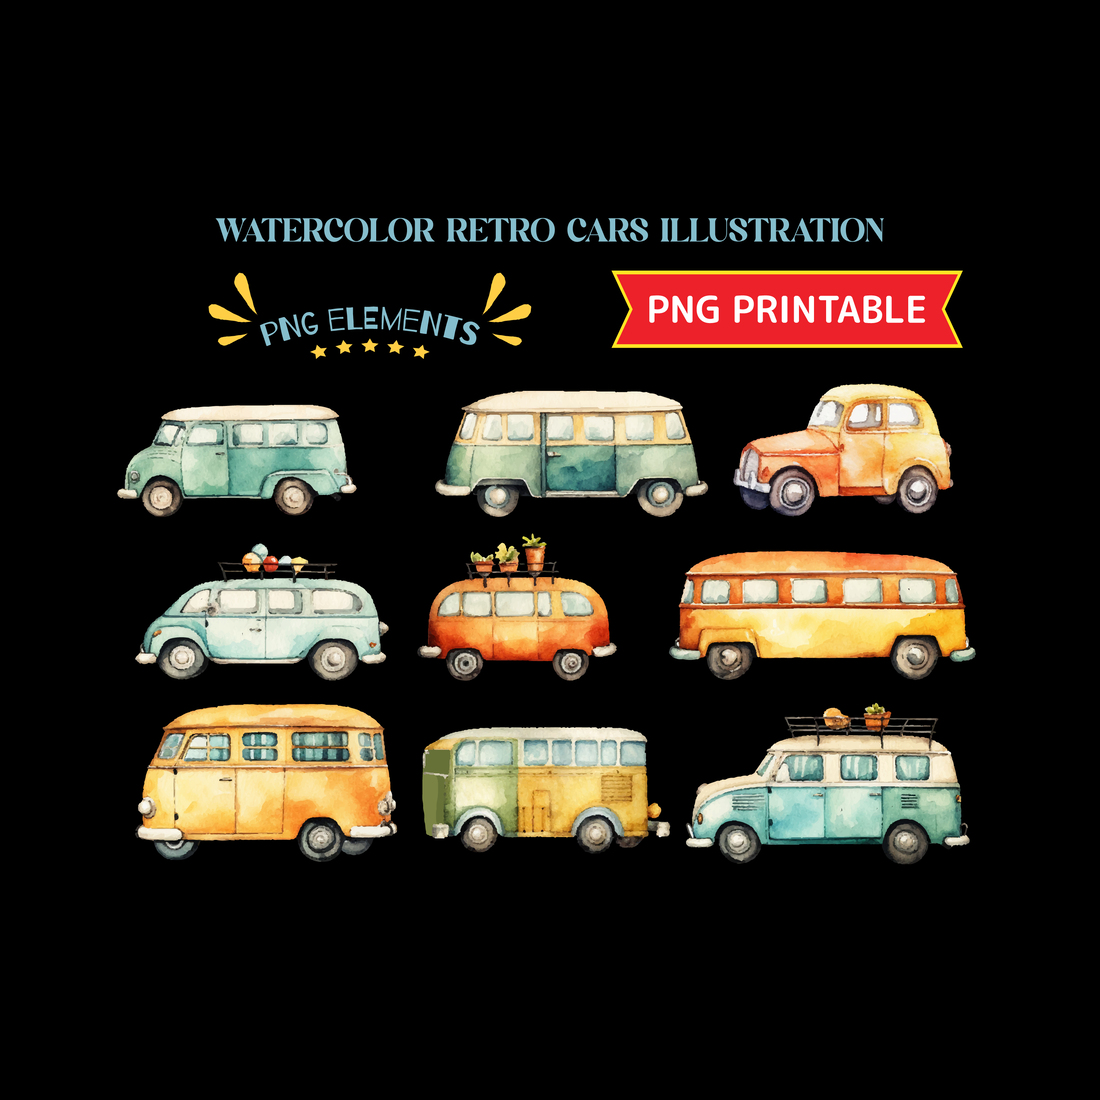 Watercolor vintage hand drawn retro cars illustration preview image.